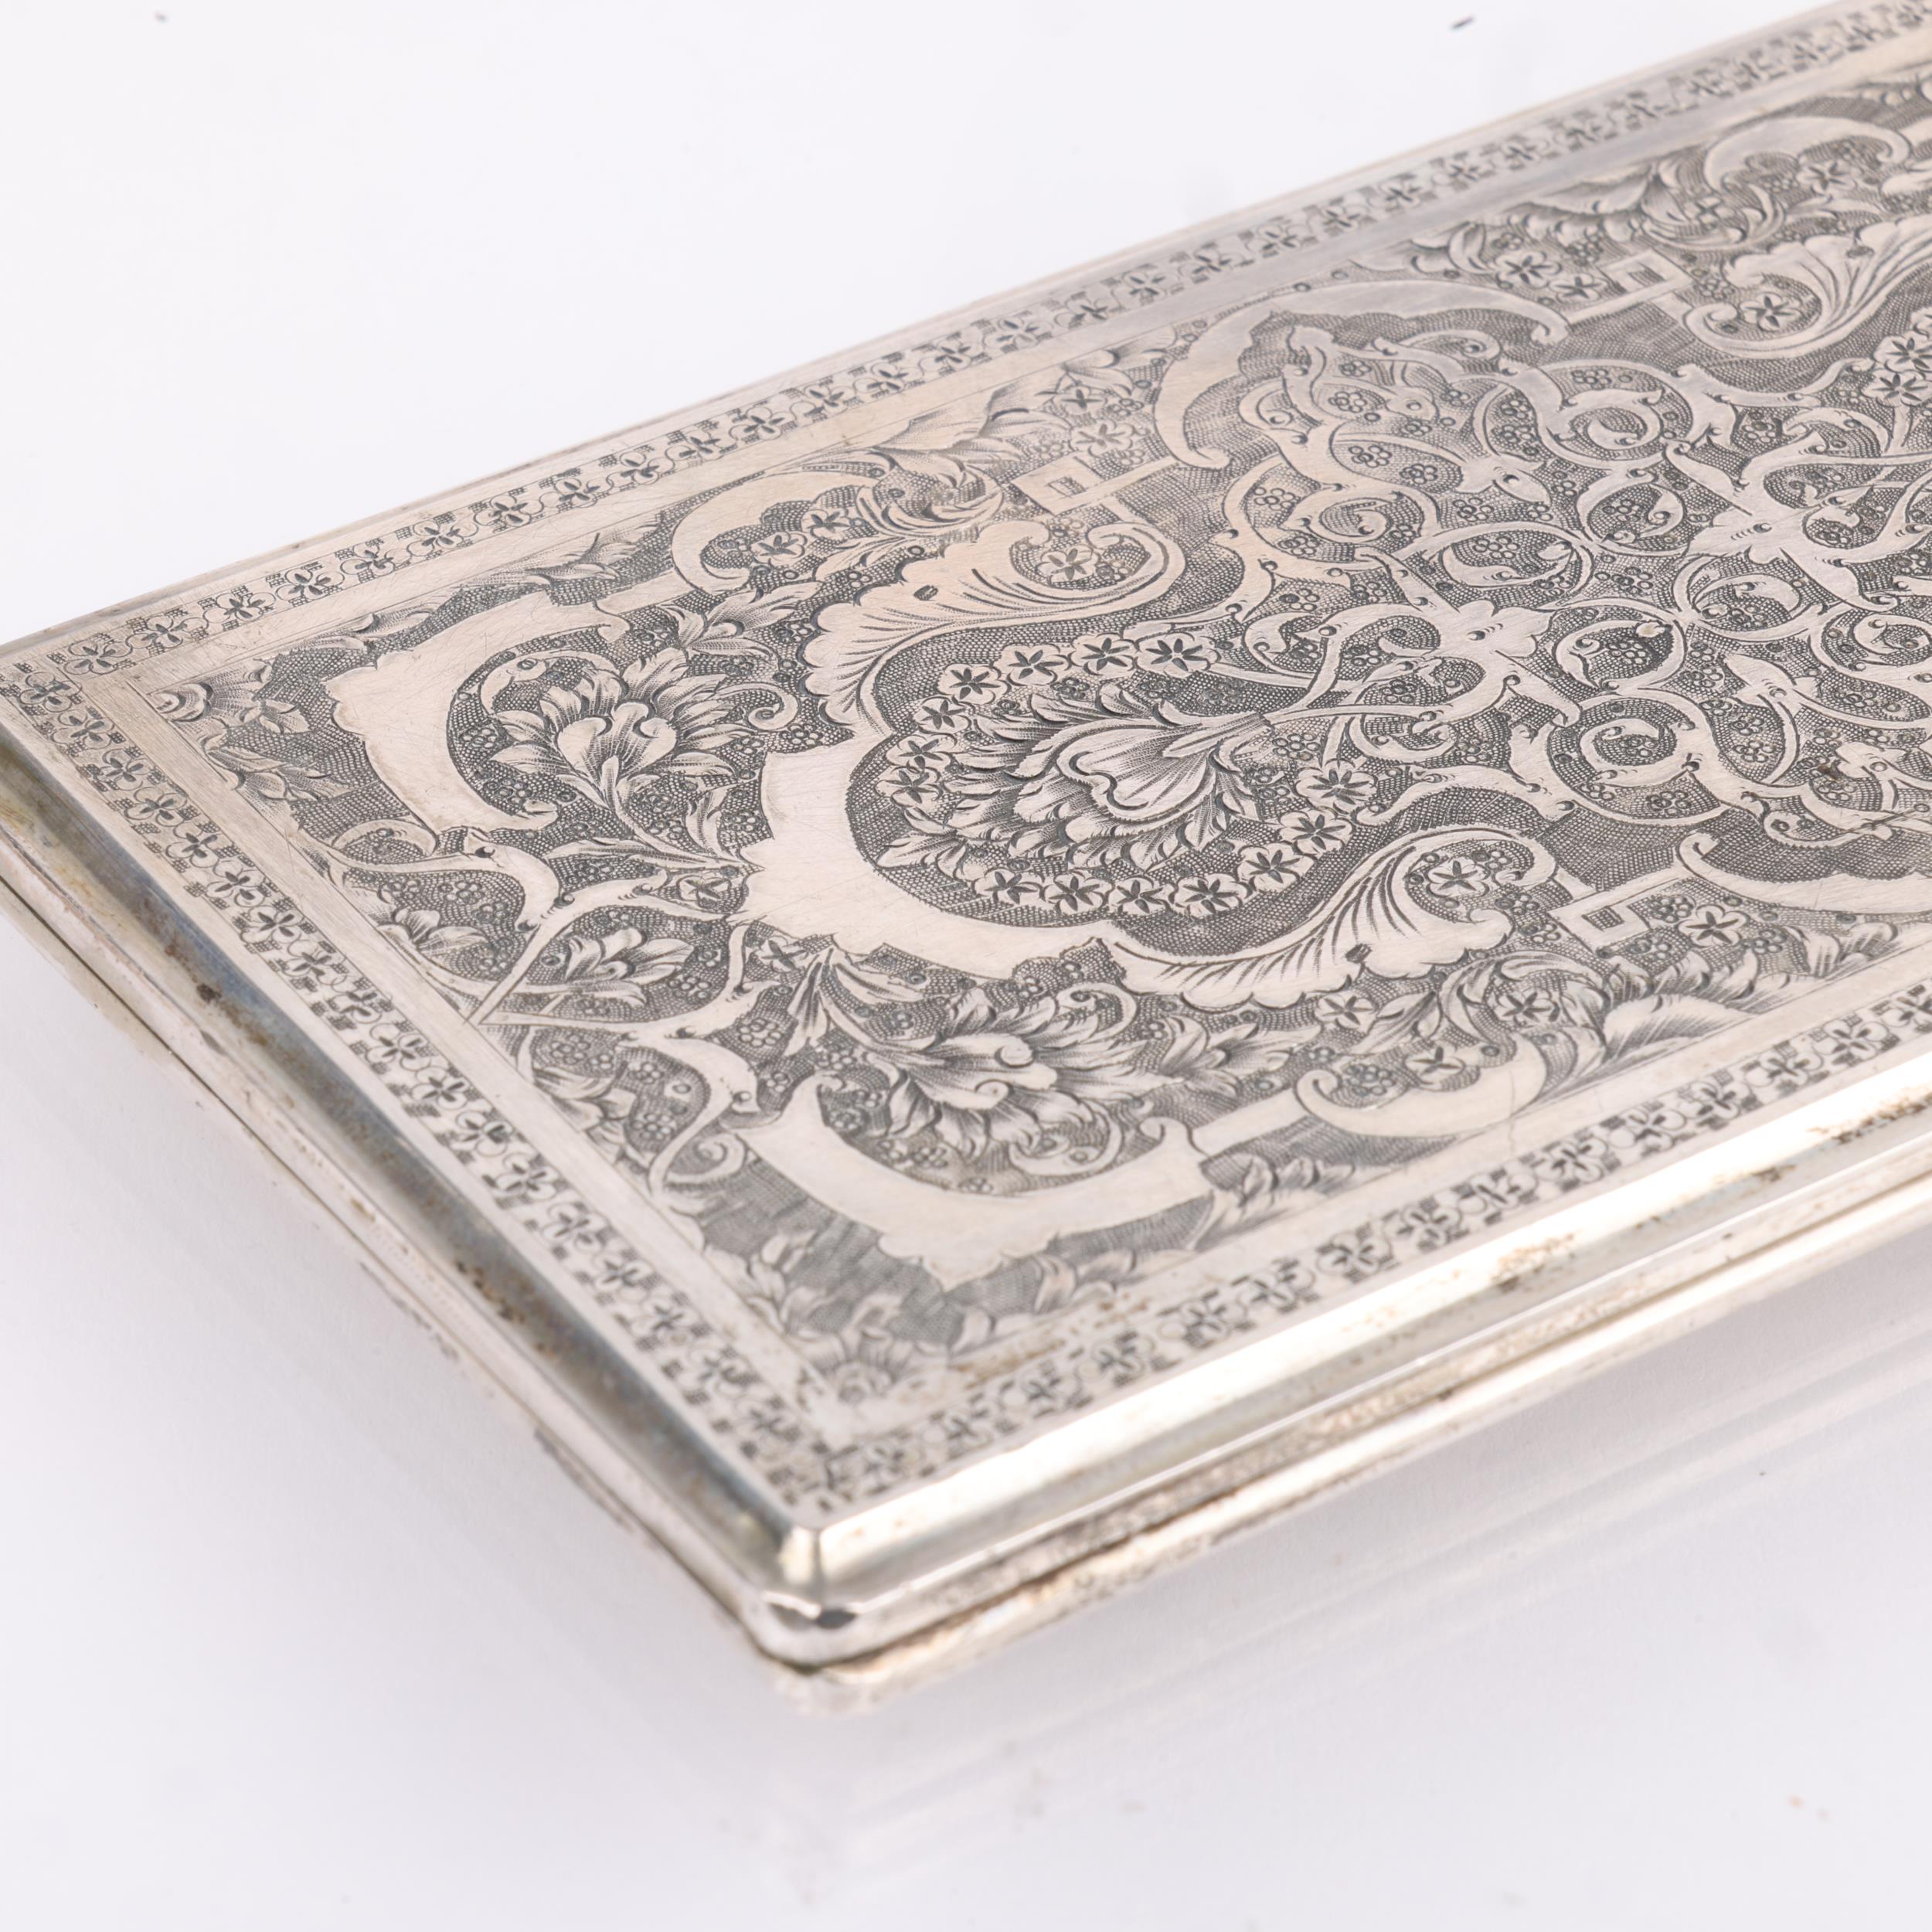 A fine Persian silver floral cigarette case, allover engraved decoration with sprung hinge, marks - Image 3 of 3